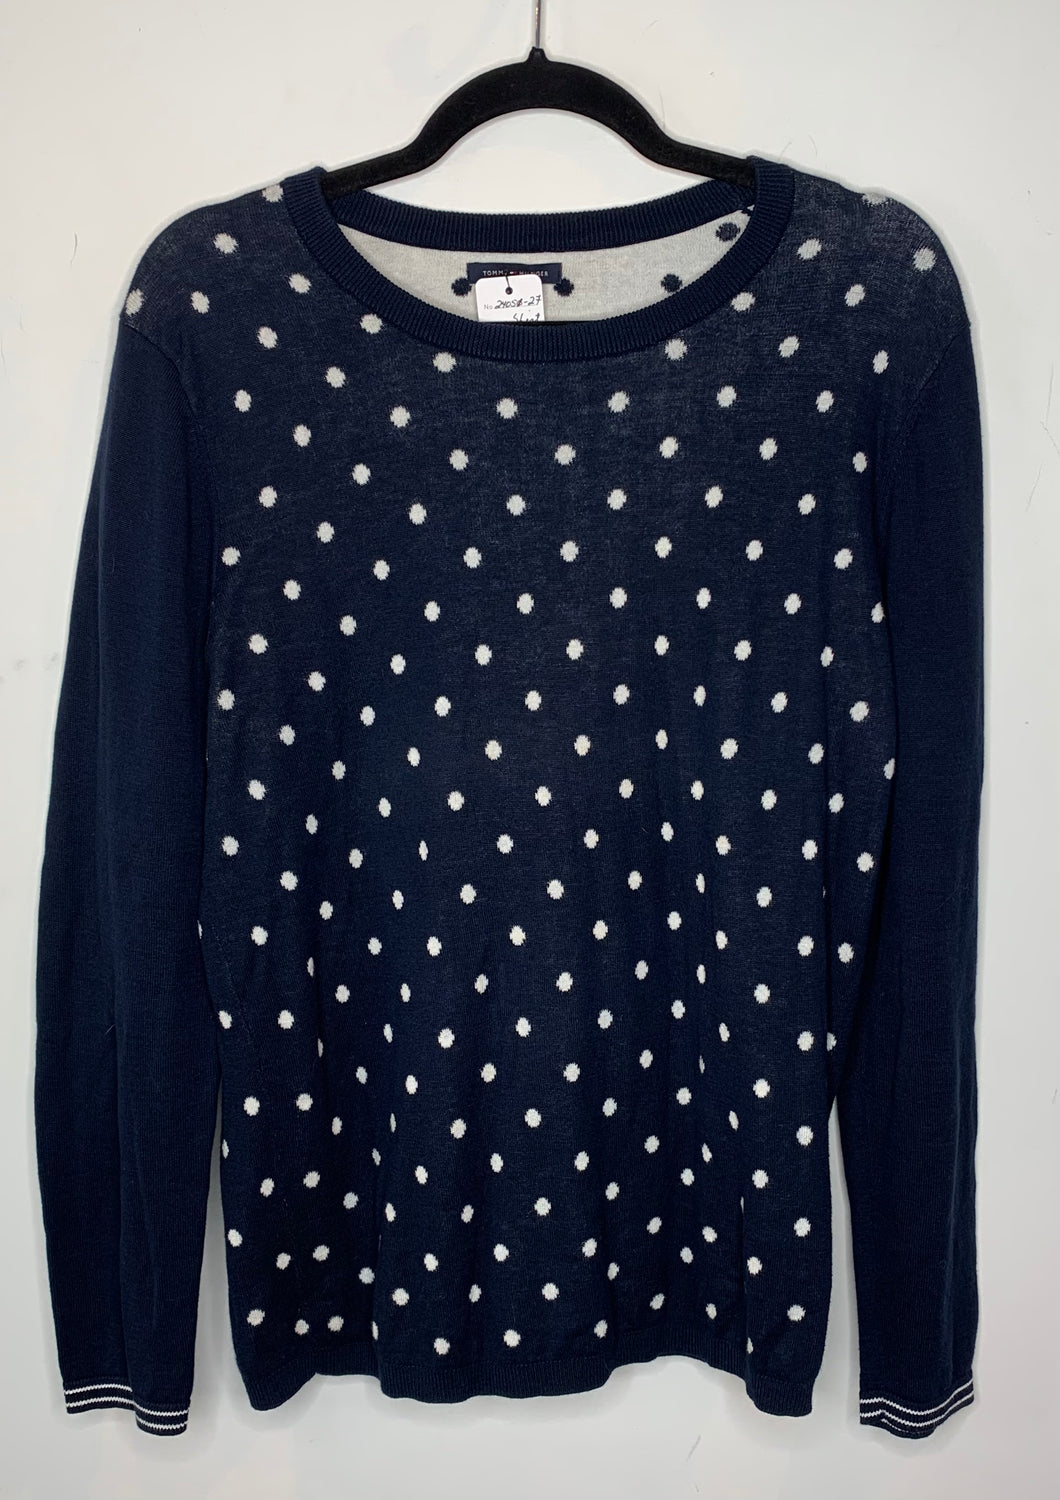 Navy Blue Sweater with White Polka Dots